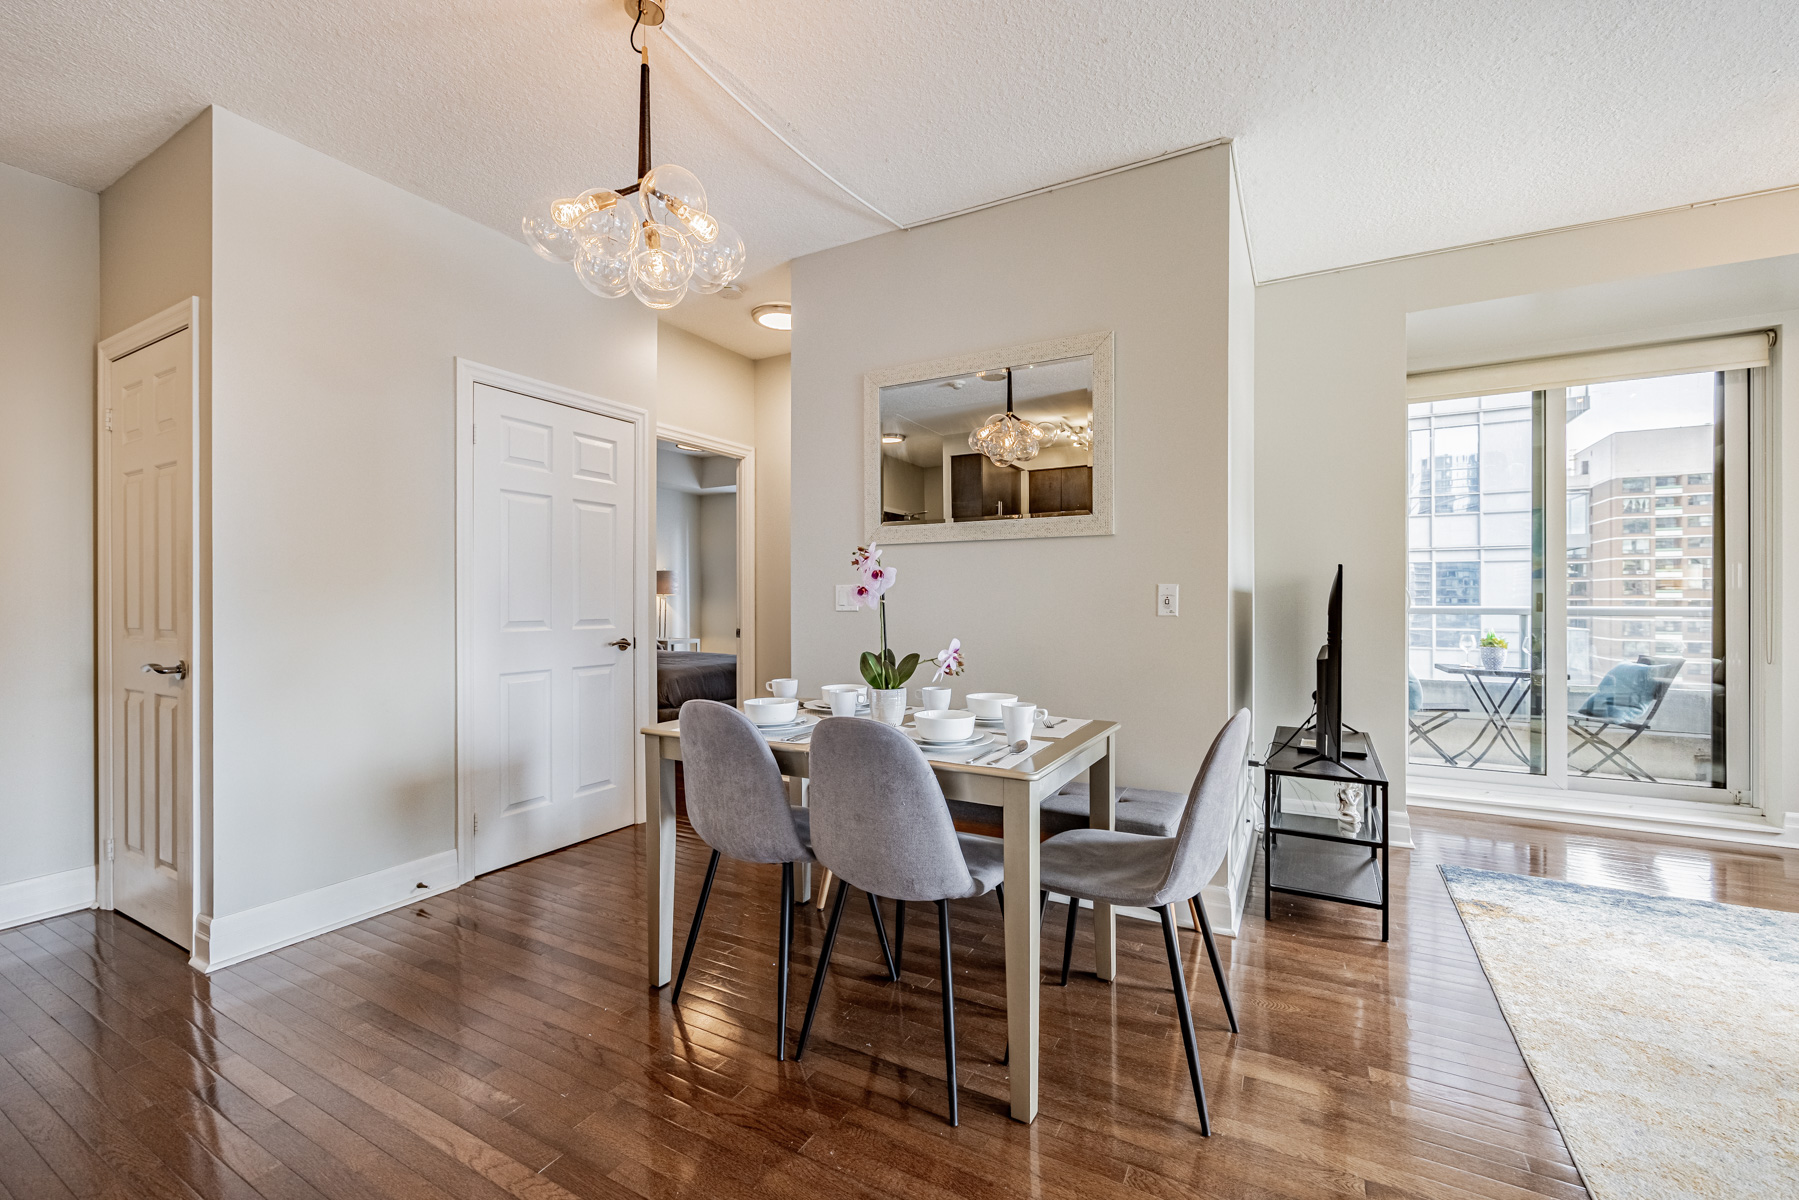 Condo dining room with dark hardwood floors and light gray walls and ceiling.